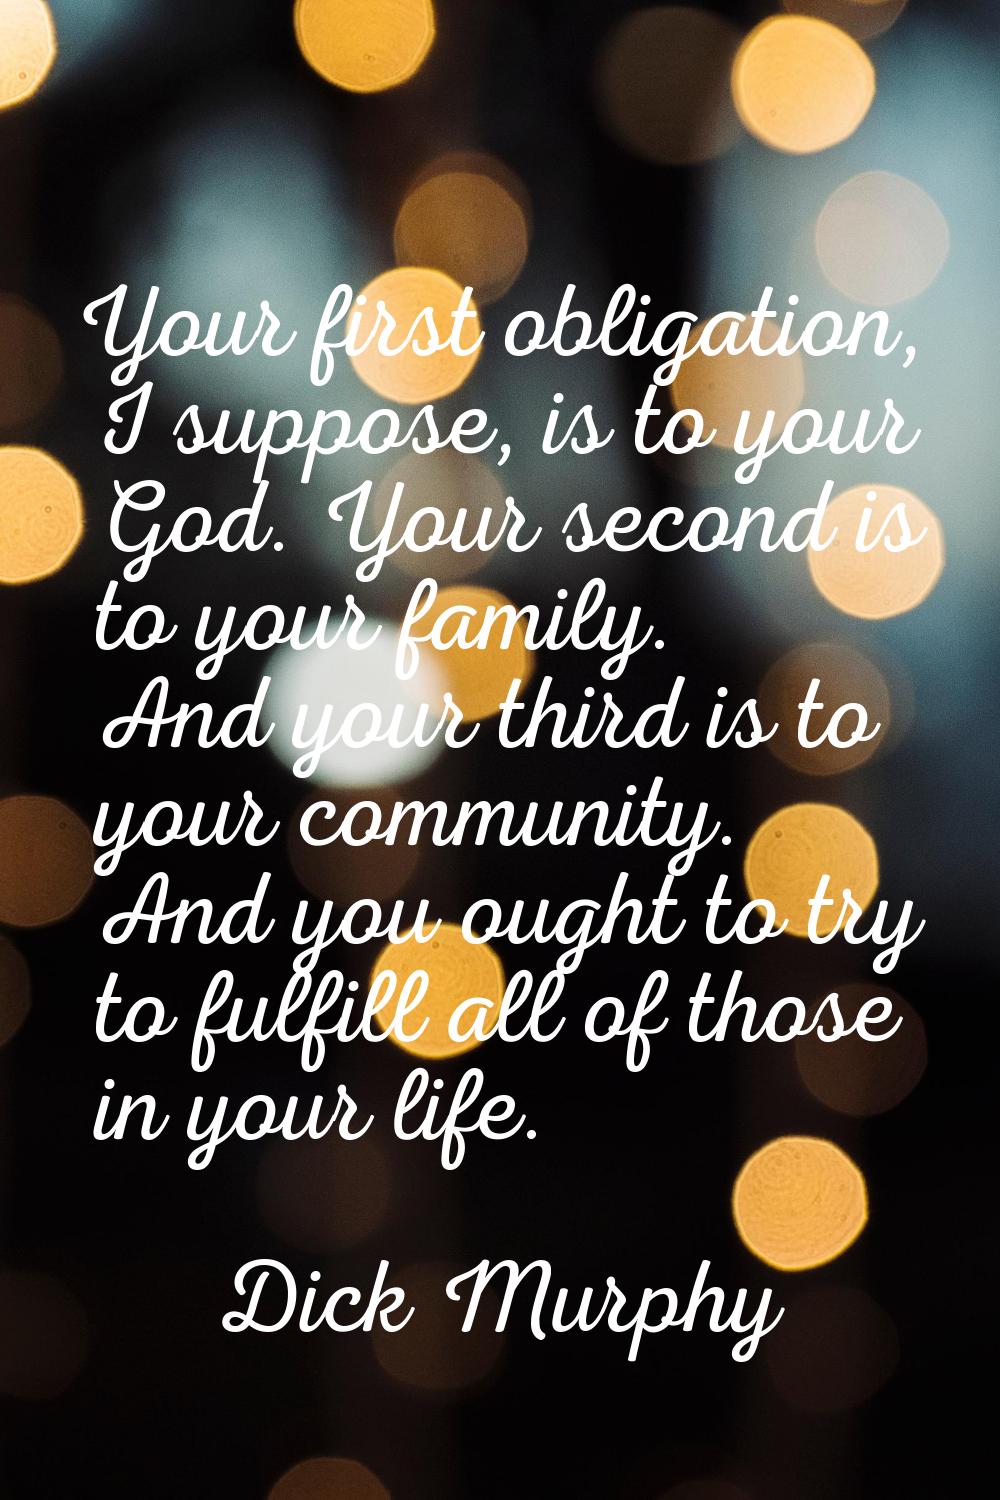 Your first obligation, I suppose, is to your God. Your second is to your family. And your third is 